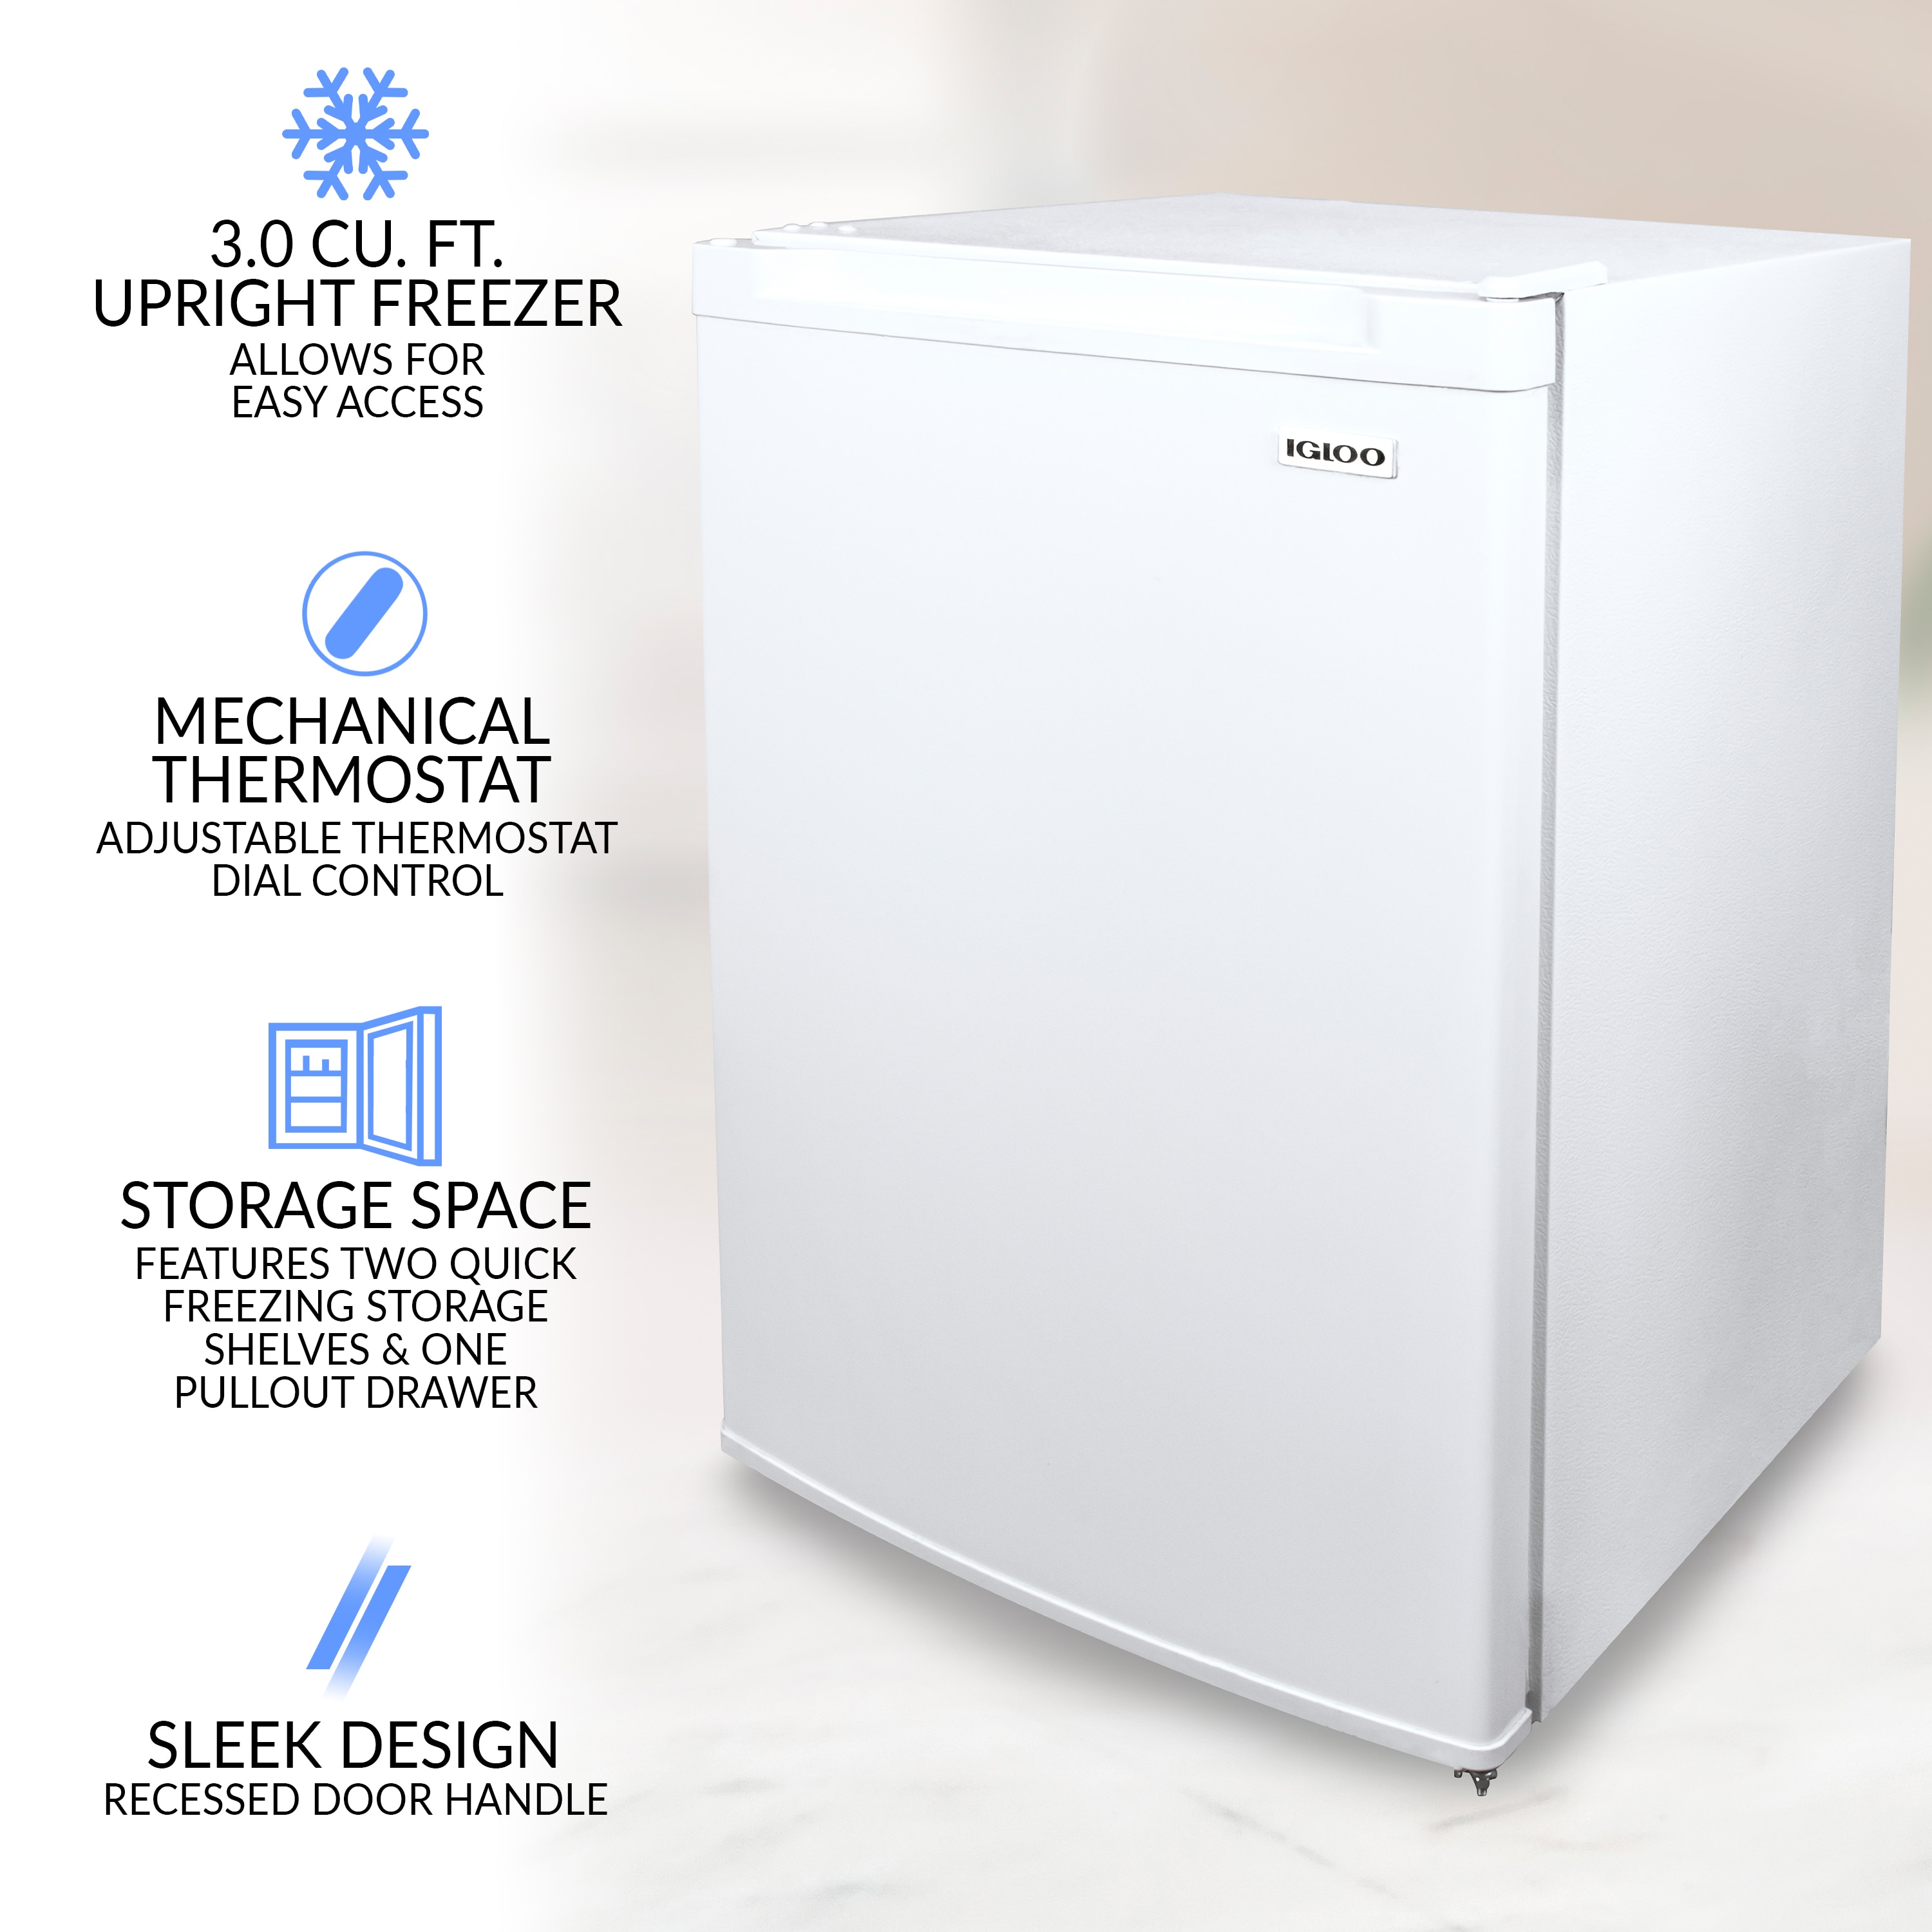  Igloo 3.5 Cu. Ft. Chest Freezer with Removable Basket and Front  Defrost Water Drain, Small Deep Freezer Perfect for Homes, Garages, and  RVs, White : Appliances